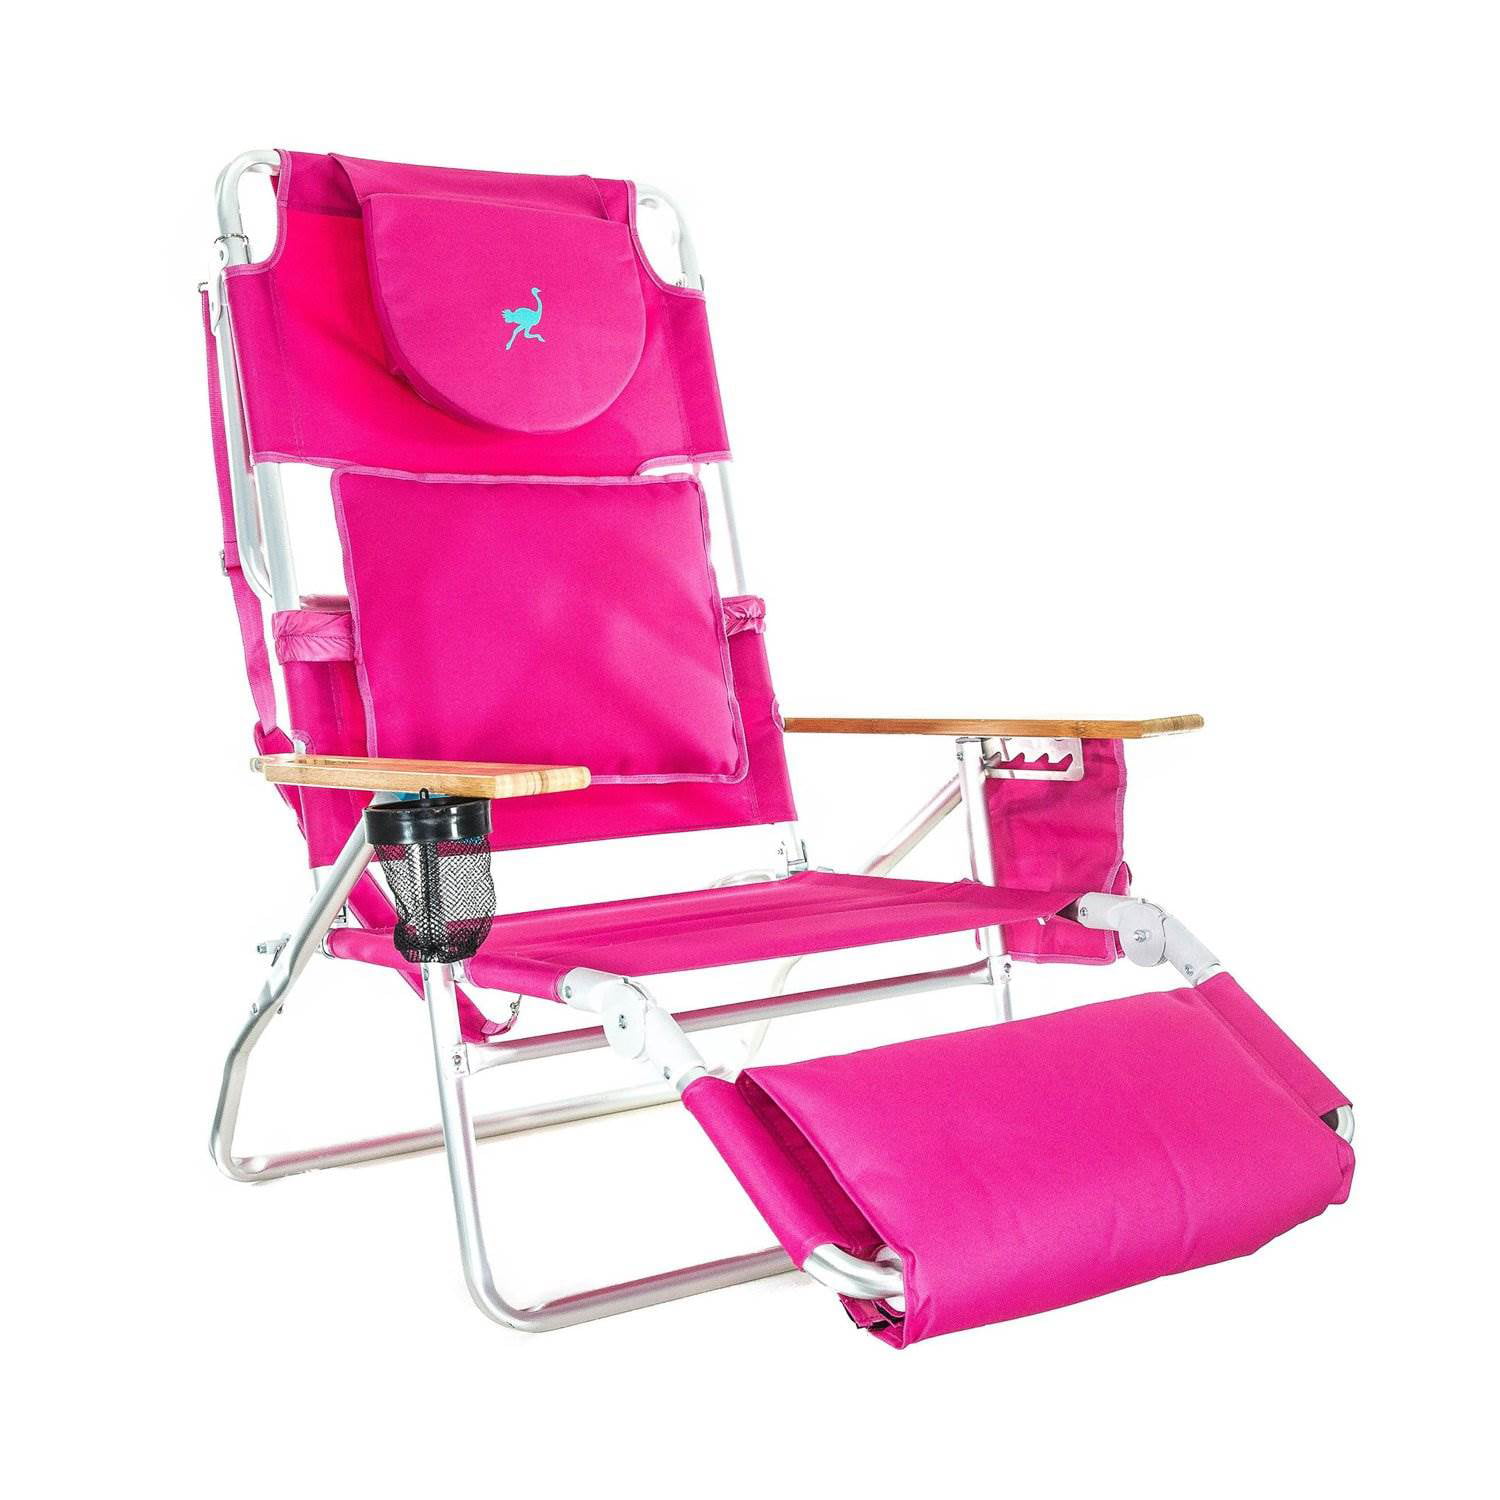 Modern Deluxe 3 In 1 Beach Chair for Small Space